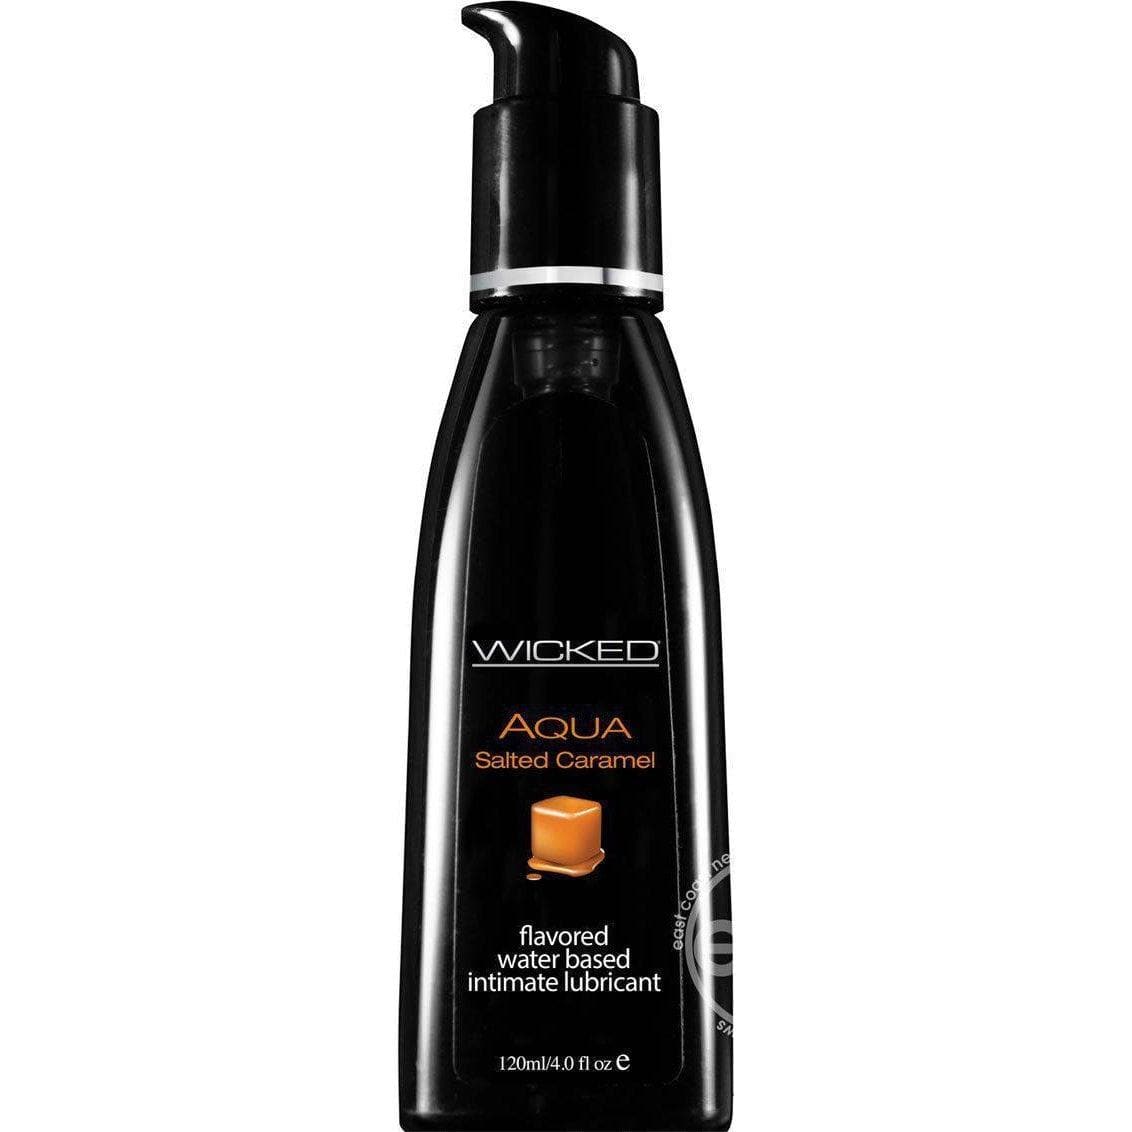 Wicked Aqua Water Based Flavored Intimate Lubricant Salted Caramel - Romantic Blessings